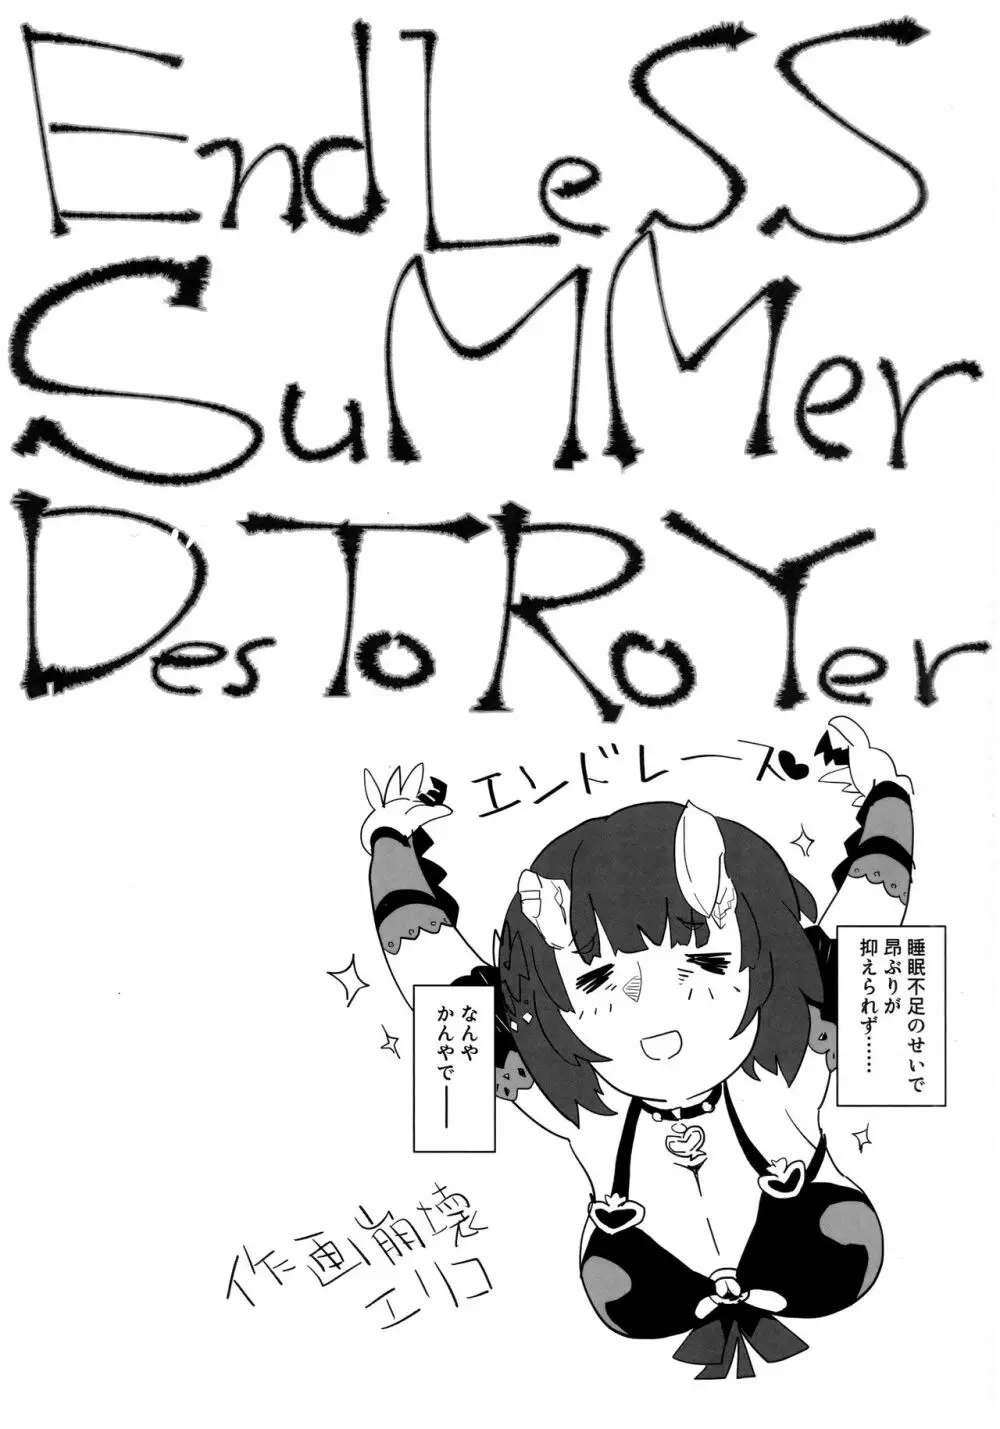 EndLeSS SuMMer DesTRoYer - page3